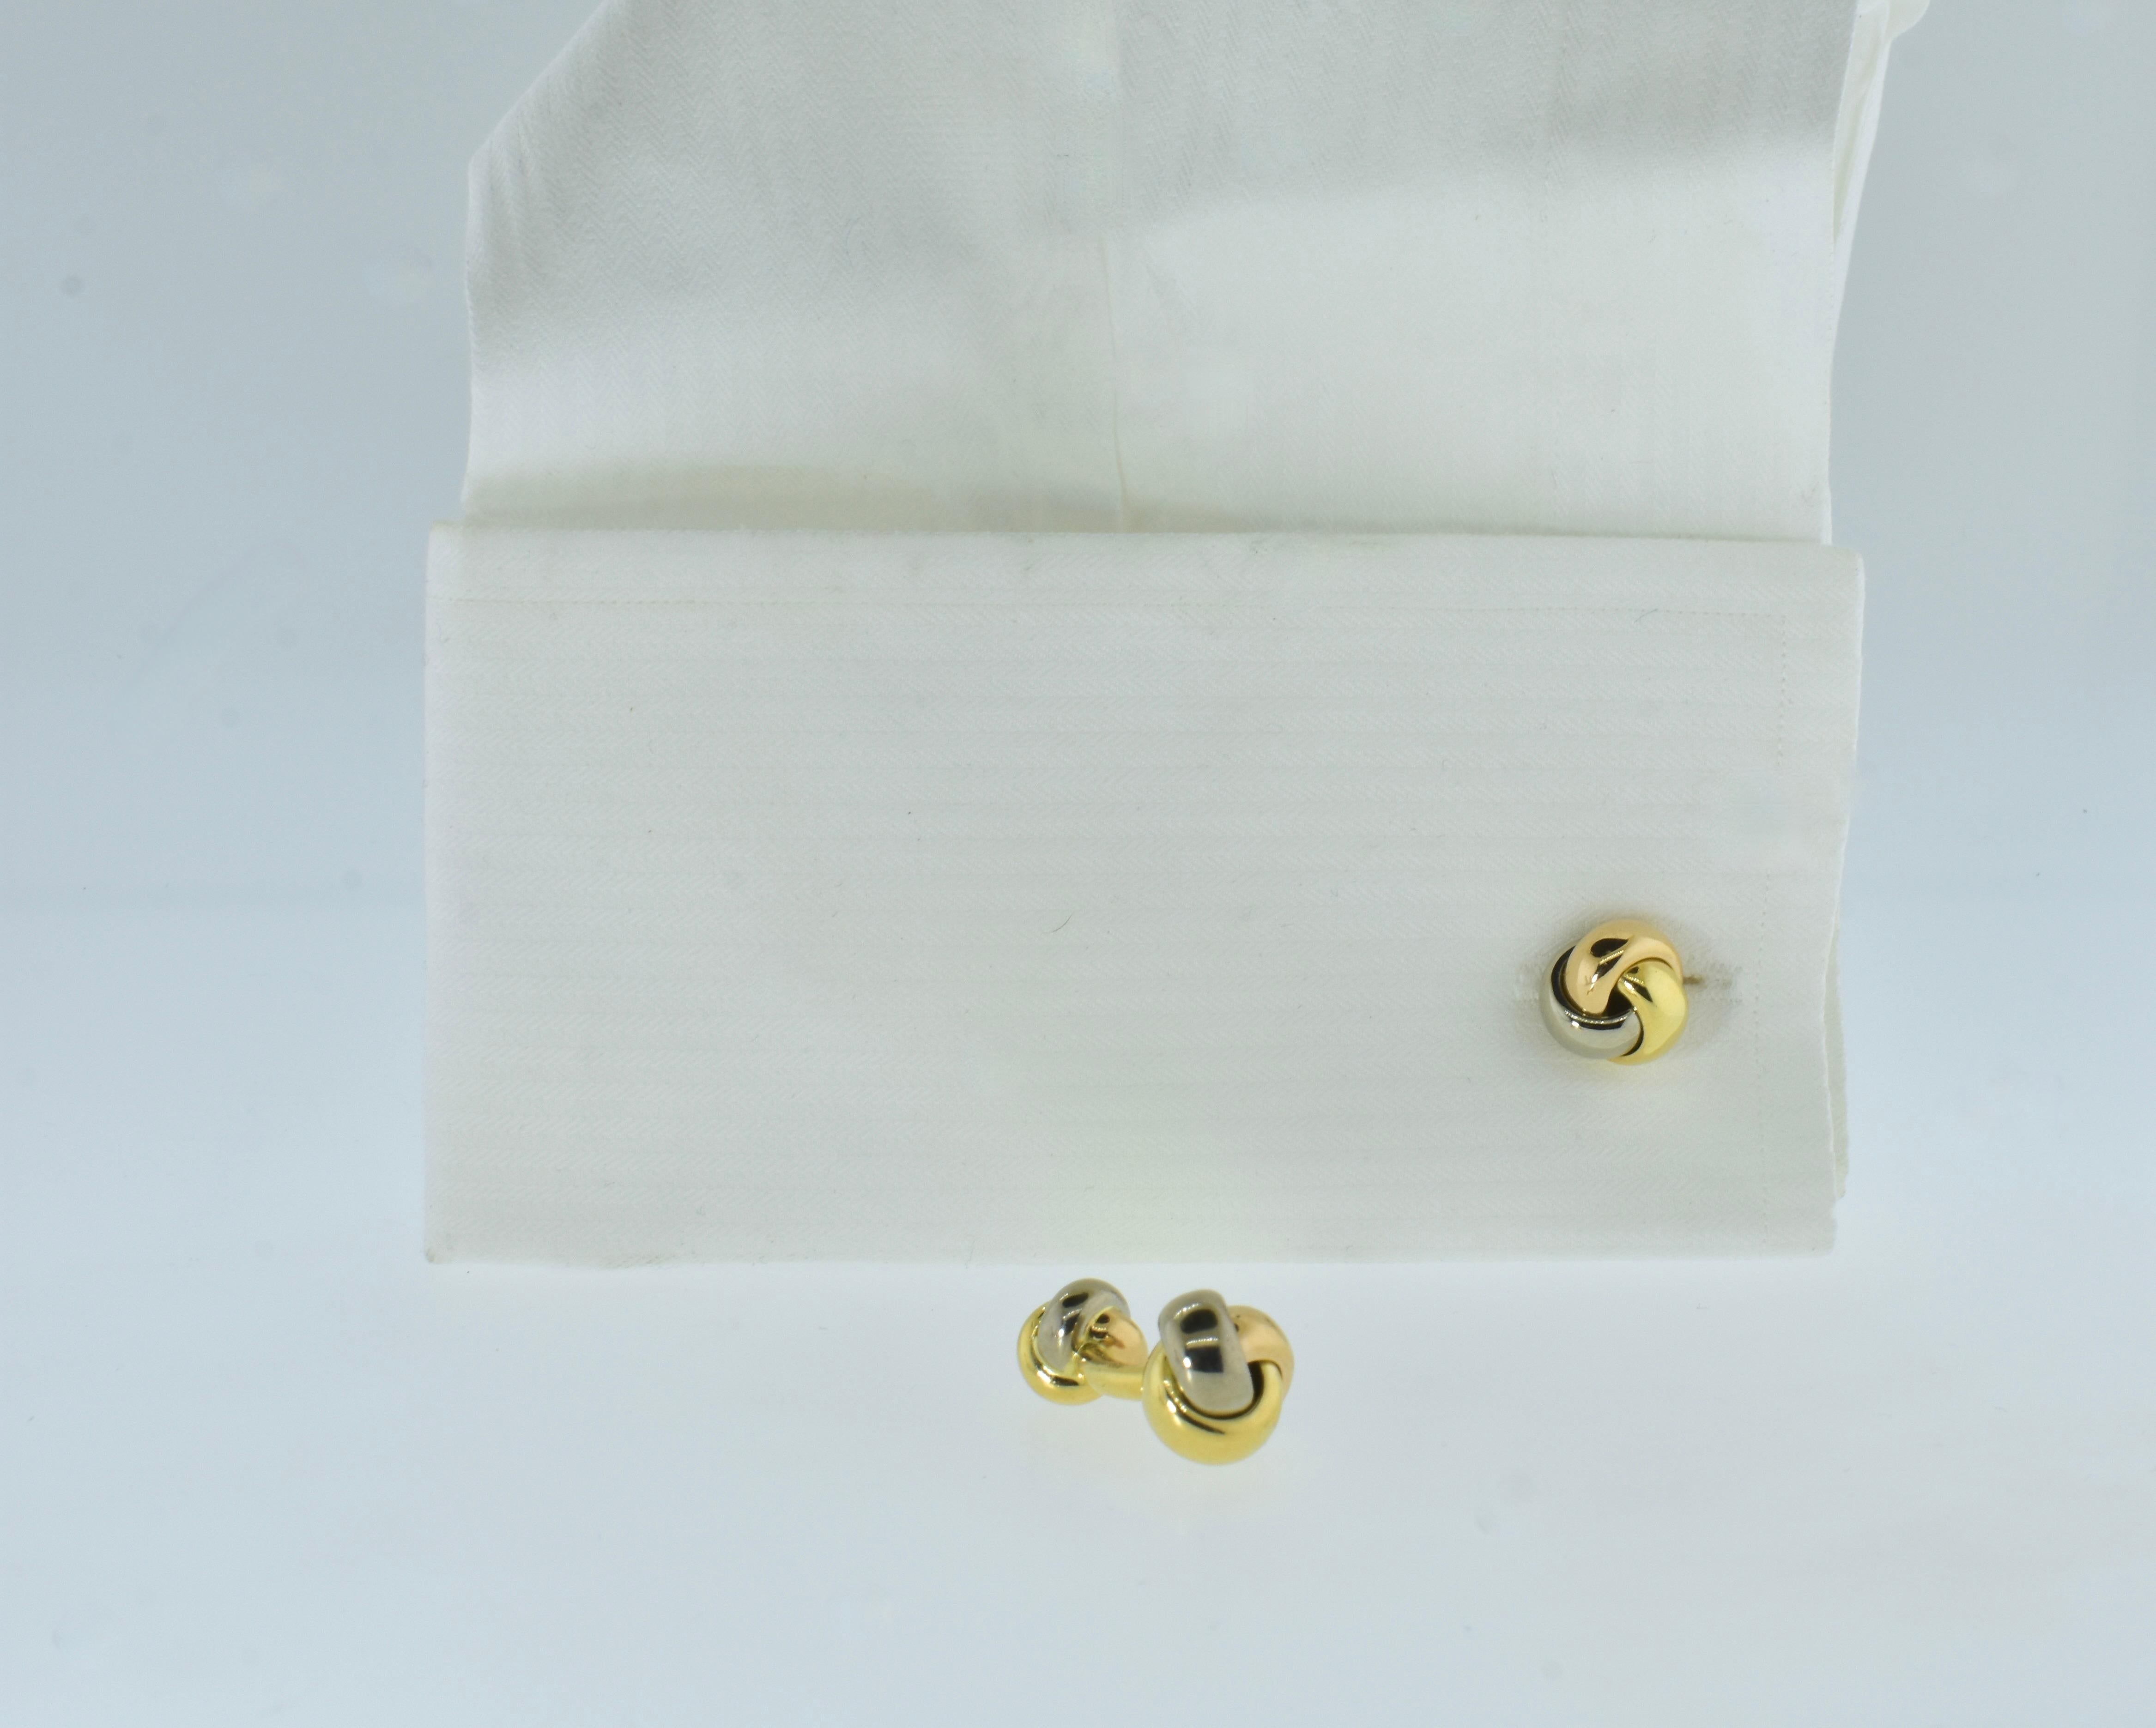 Cartier cufflinks 18K tri-color gold, pink, white and yellow, back to back  of love knots, one large the other smaller.  Signed by Cartier, numbered and marked 750 for 18K, these cufflinks weigh 21.6 grams or about 2/3 of a troy ounce and are